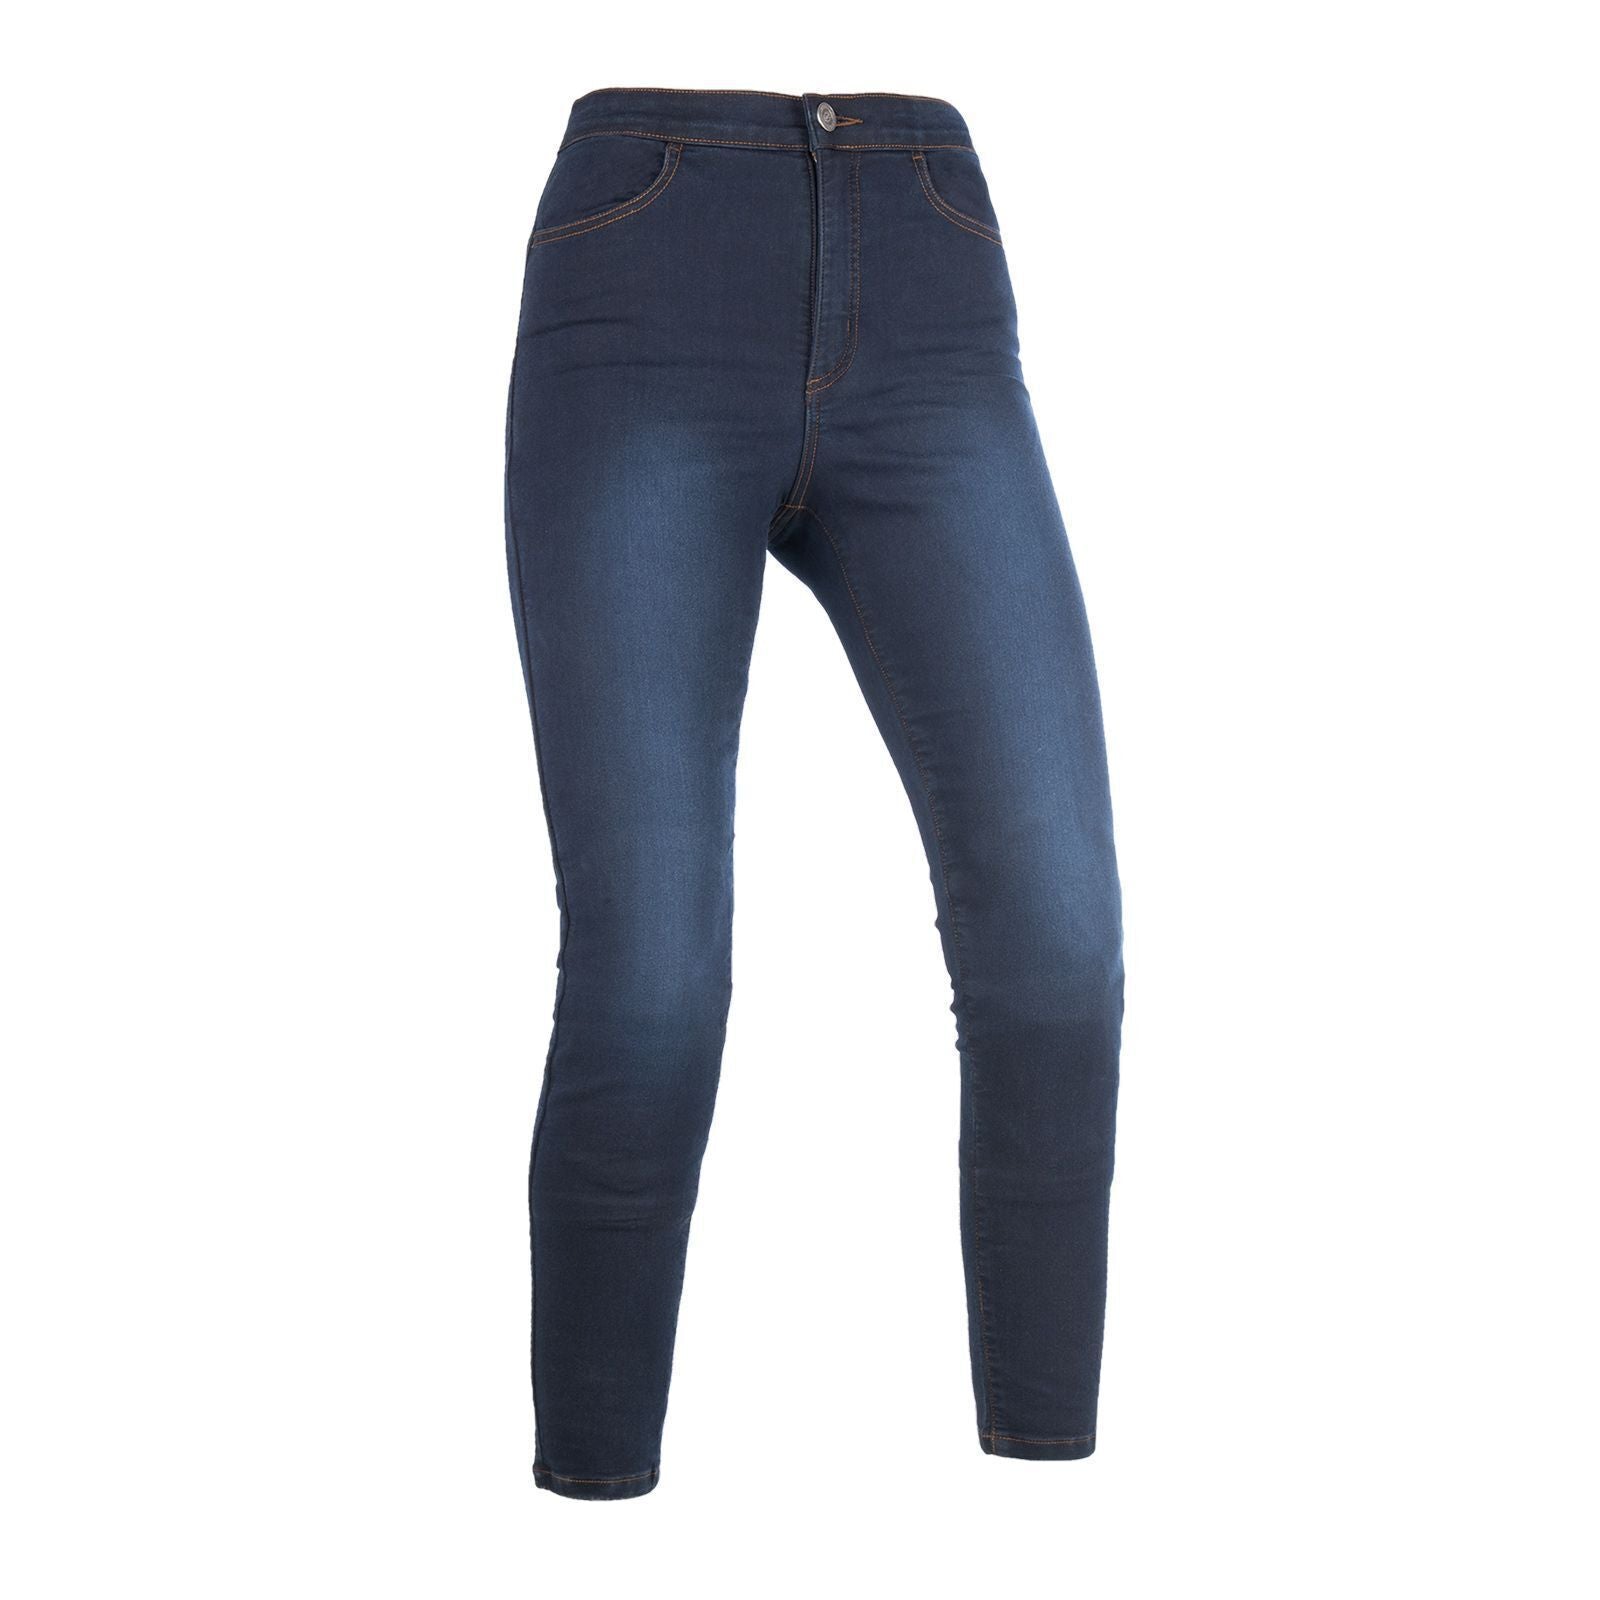 BGA Ladies Super Jegging Motorcycle Protective Jeans Blue